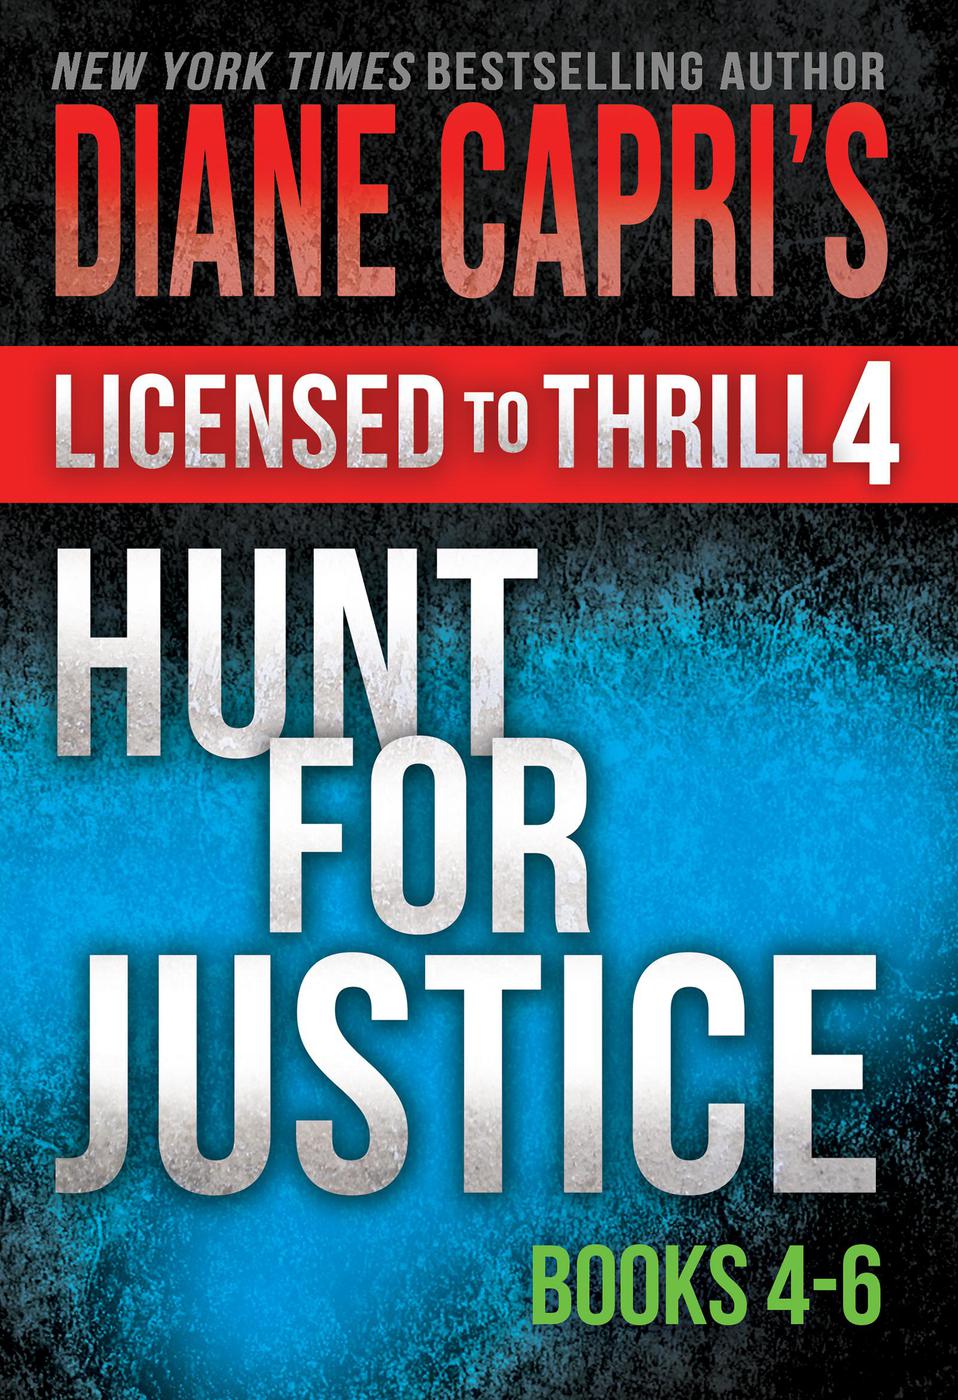 Cover image for Licensed to Thrill 4: Hunt For Justice Series Books 4 - 6 (Diane Capri’s Licensed to Thrill Sets, #4) [electronic resource] :